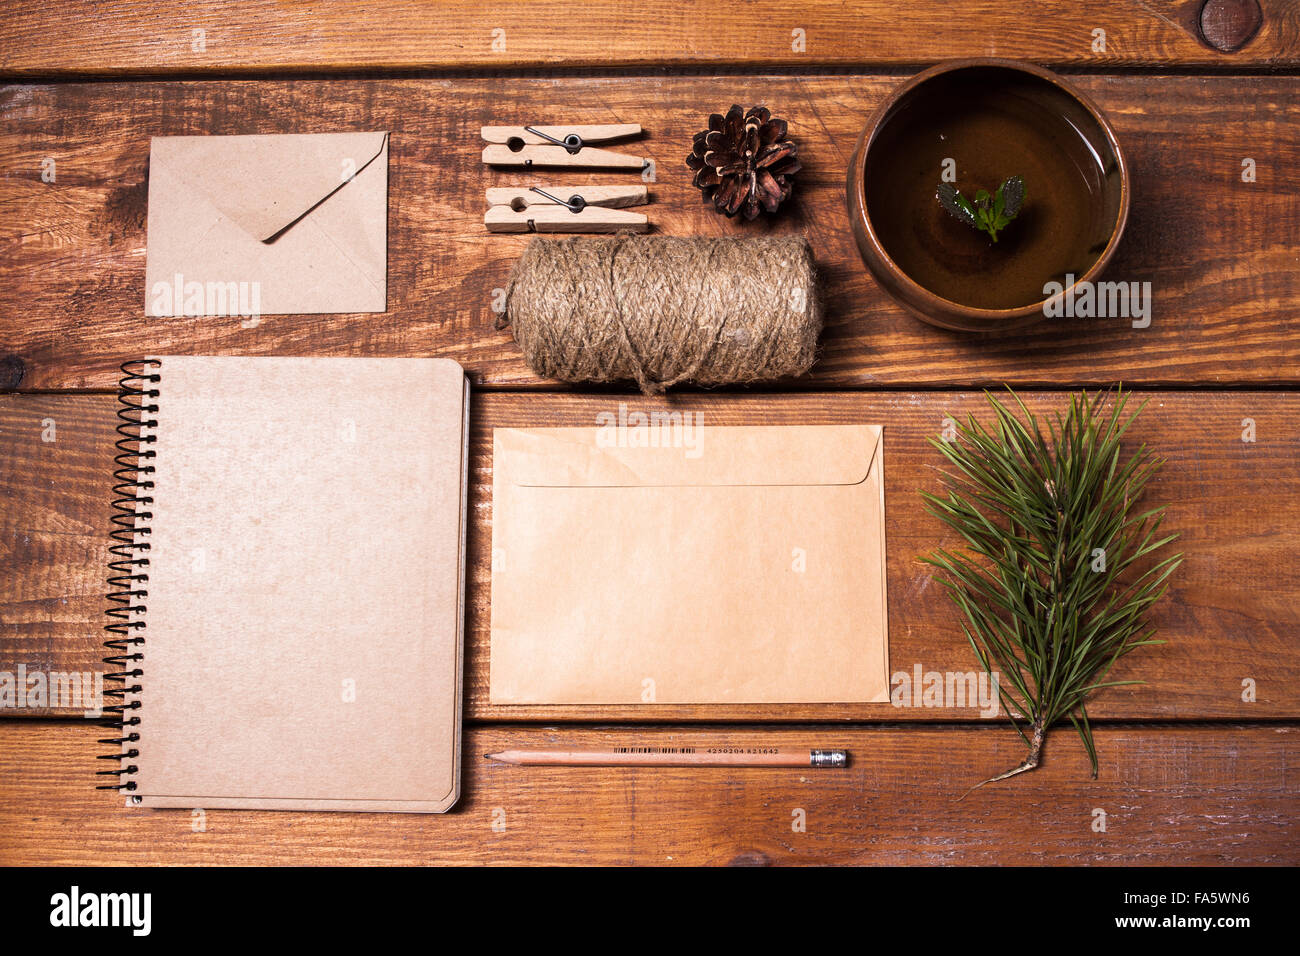 Notebook for recipes, paper envelopess, rope and clothespins on wooden table. Stock Photo